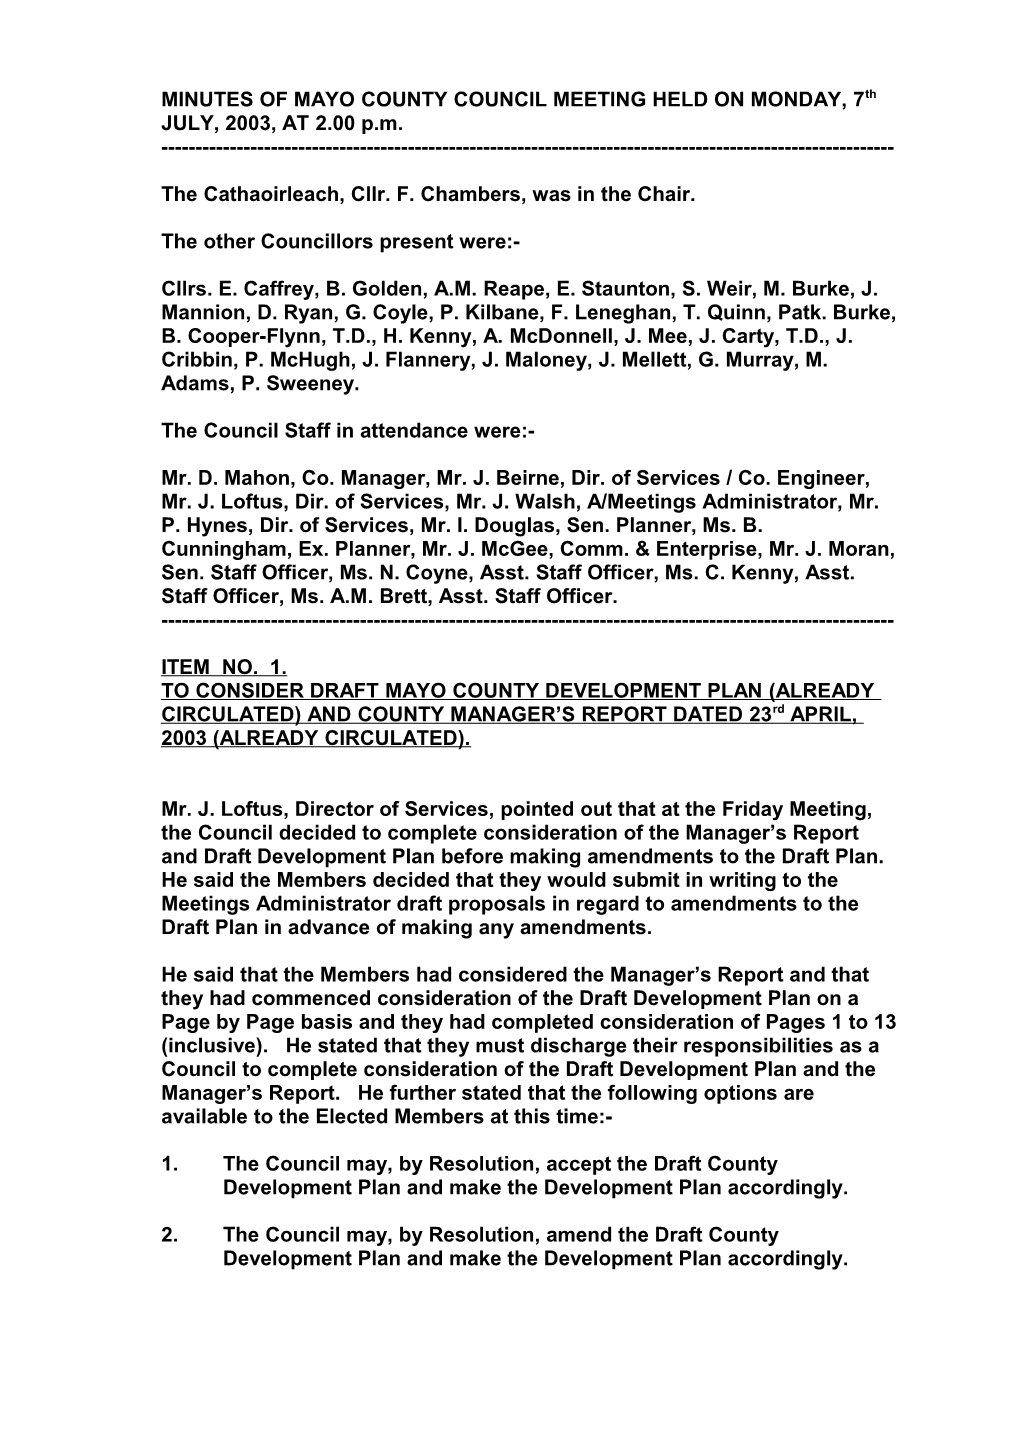 MINUTES of MAYO COUNTY COUNCIL MEETING HELD on MONDAY, 7Th JULY, 2003, at 2